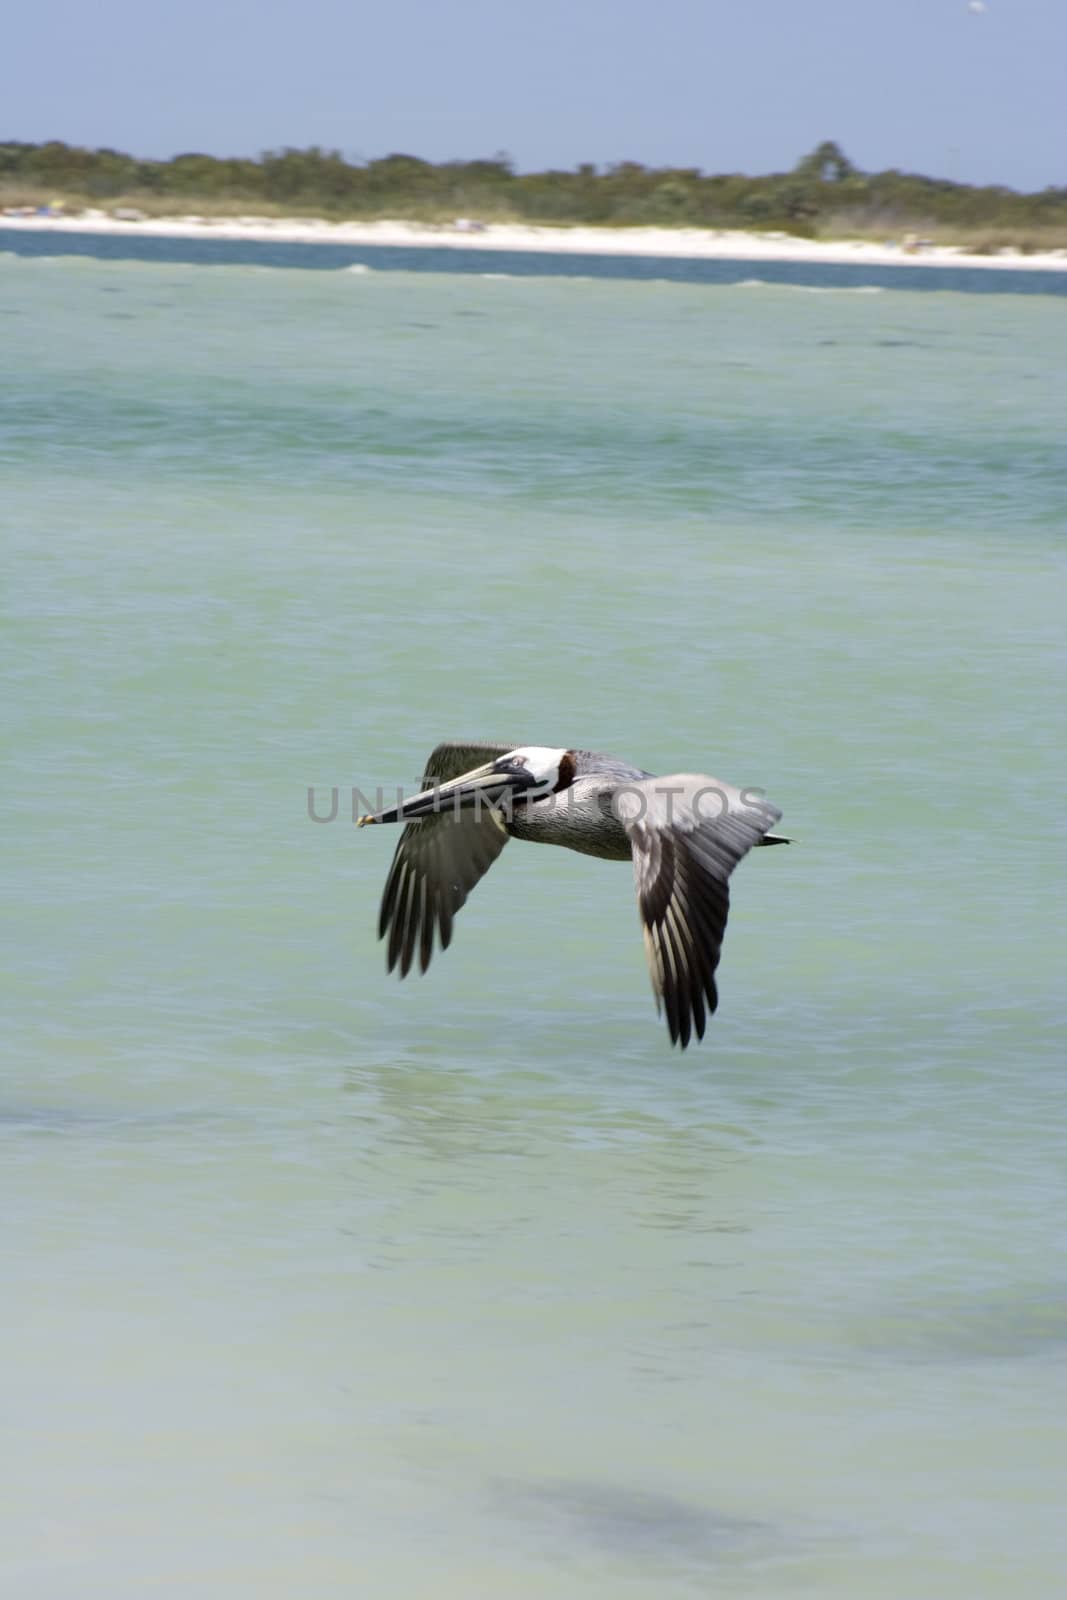 Large pelican on the coast in Florida